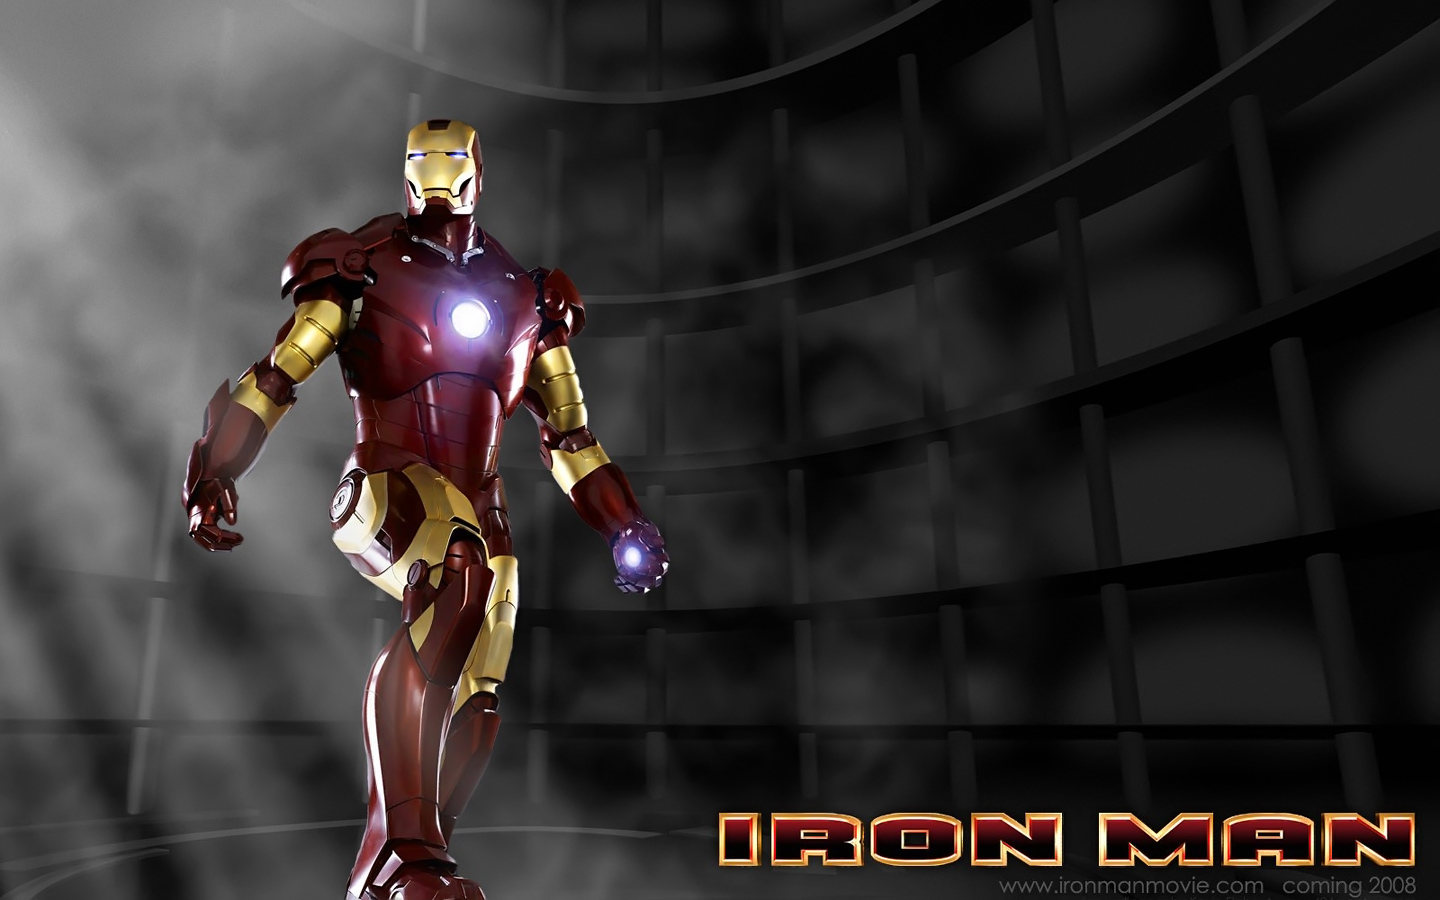 IRON MAN 3 NEW HD WALLPAPERS 2013:Image to Wallpaper